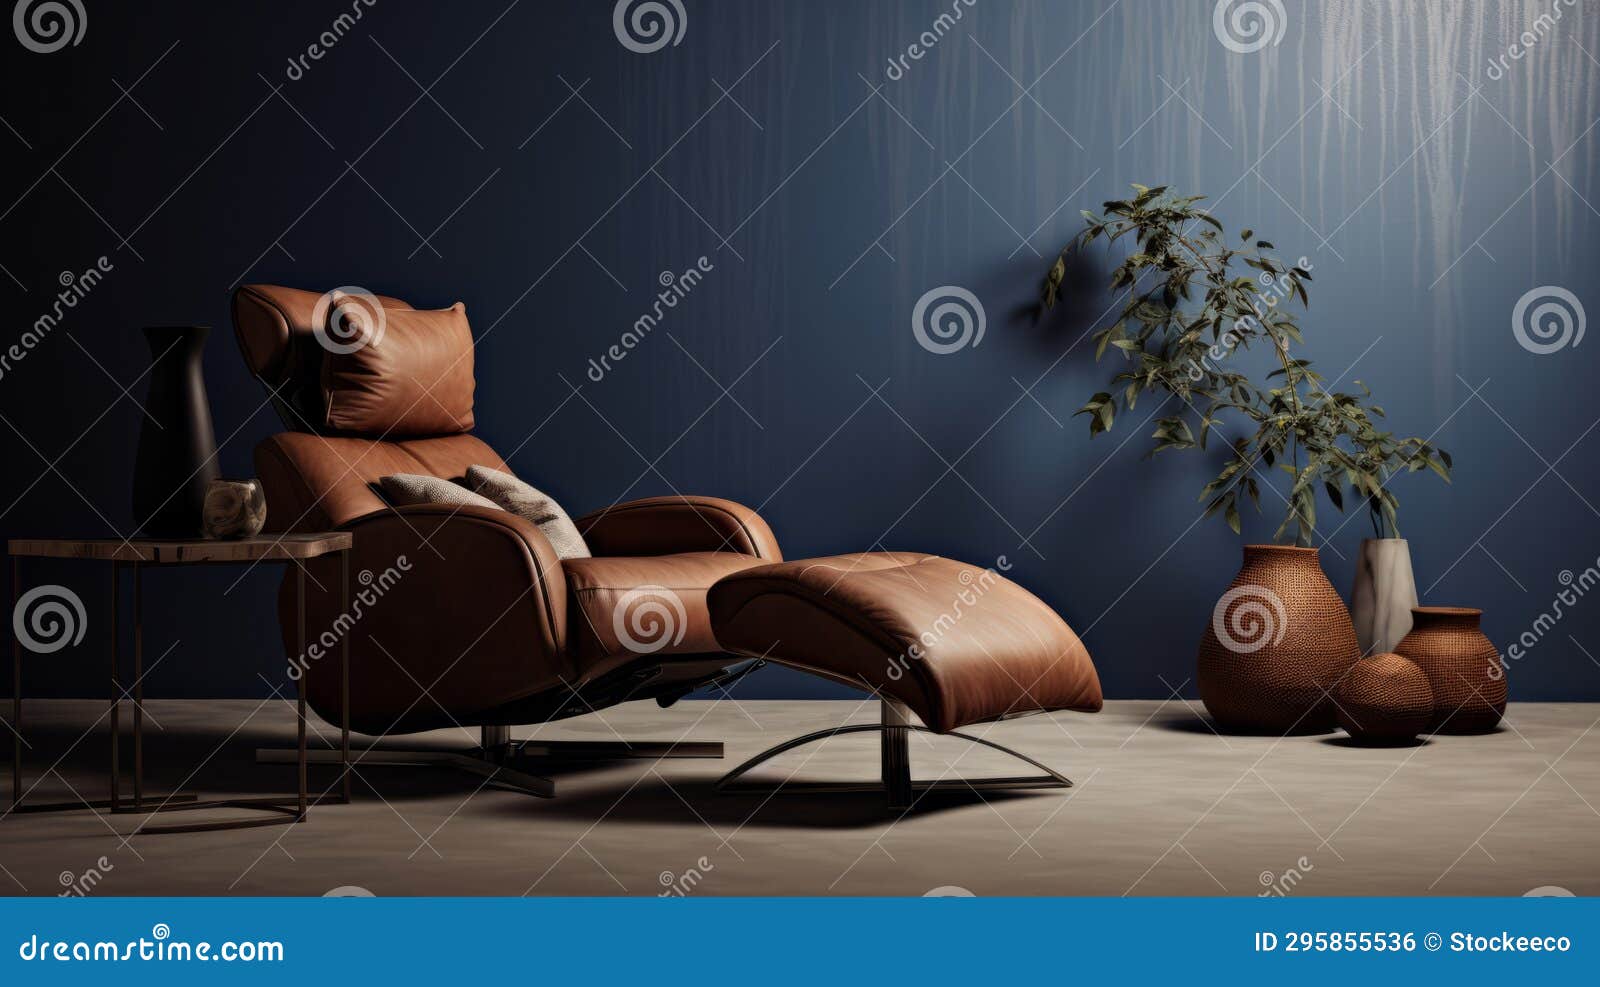 brown leather recliner with ottoman - stylish and comfortable